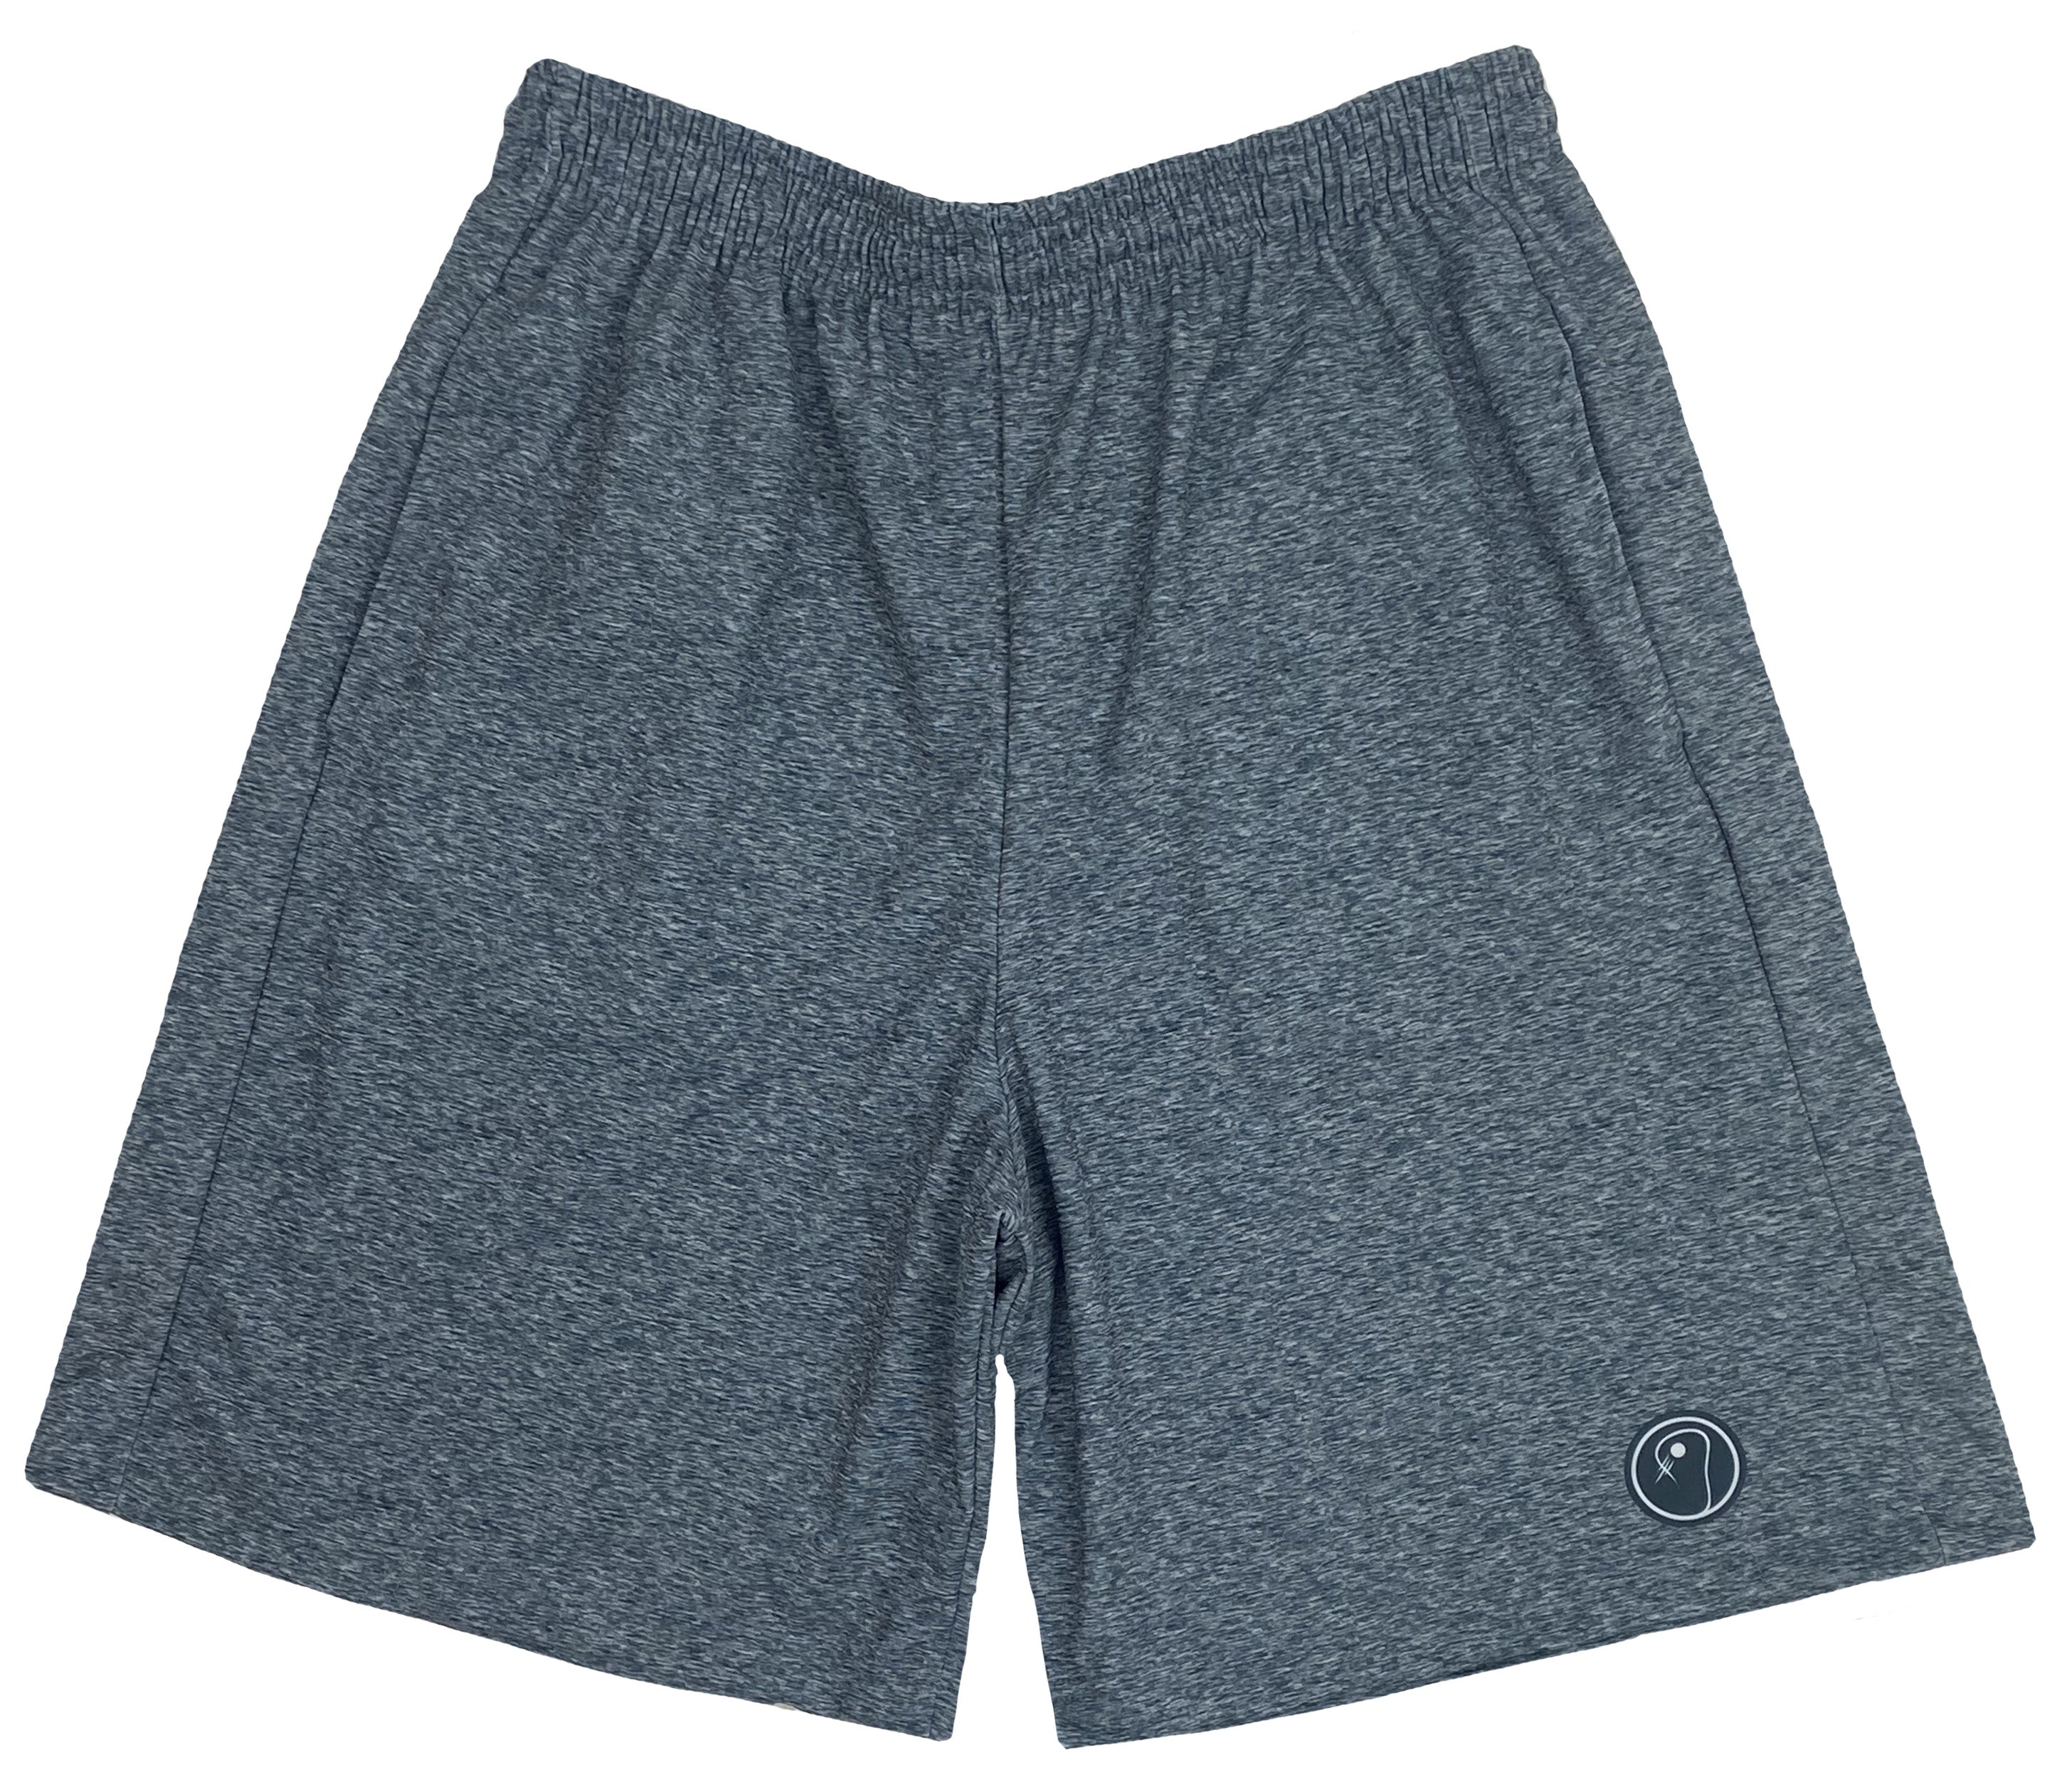 Mens Graphic Lacrosse Shorts - Gray Heather